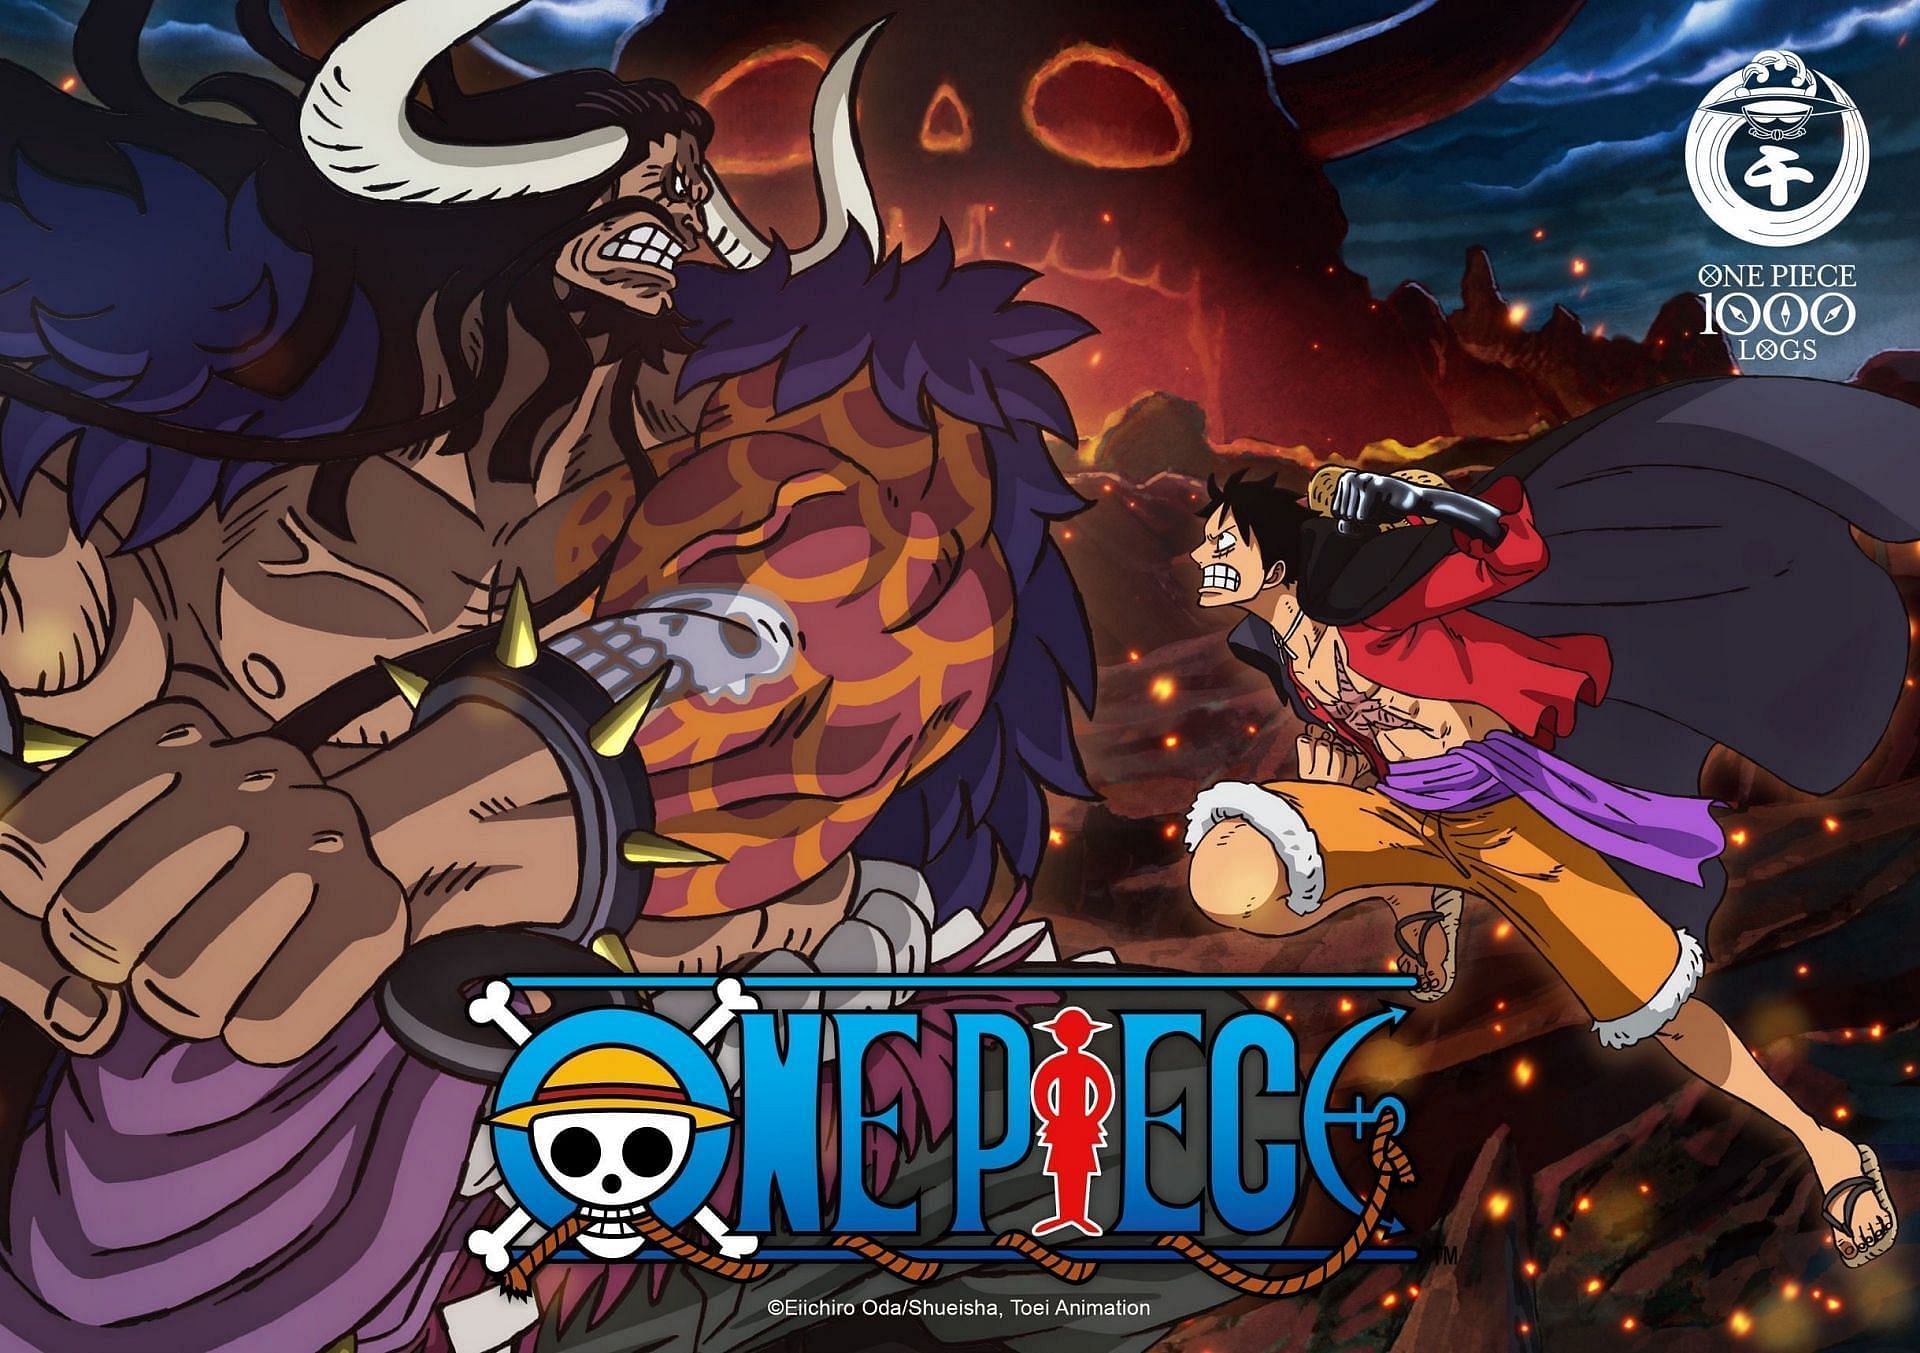 One Piece&#039;s 1,000th episode airs on November 20 for fans all over the world to see (Image via Sportskeeda)